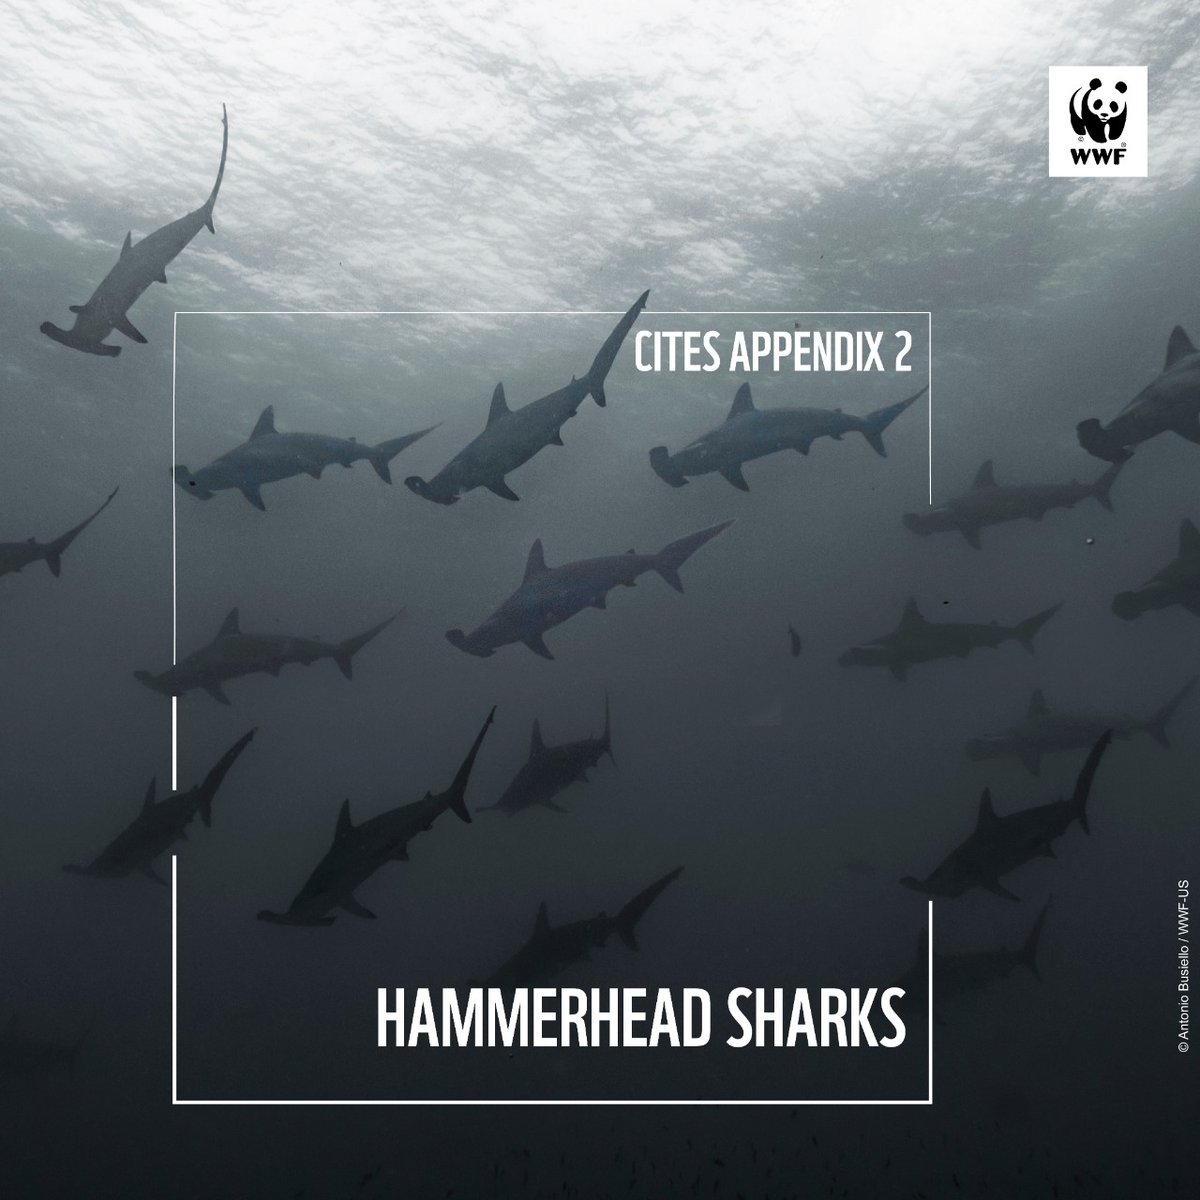 After intensive debate, member countries, yesterday gave preliminary approval for the inclusion of the entire families of hammerhead and requiem sharks to @CITES appendix II. This was a historic vote for the health of the oceans. #CITESCoP19 #WildlifeThriving